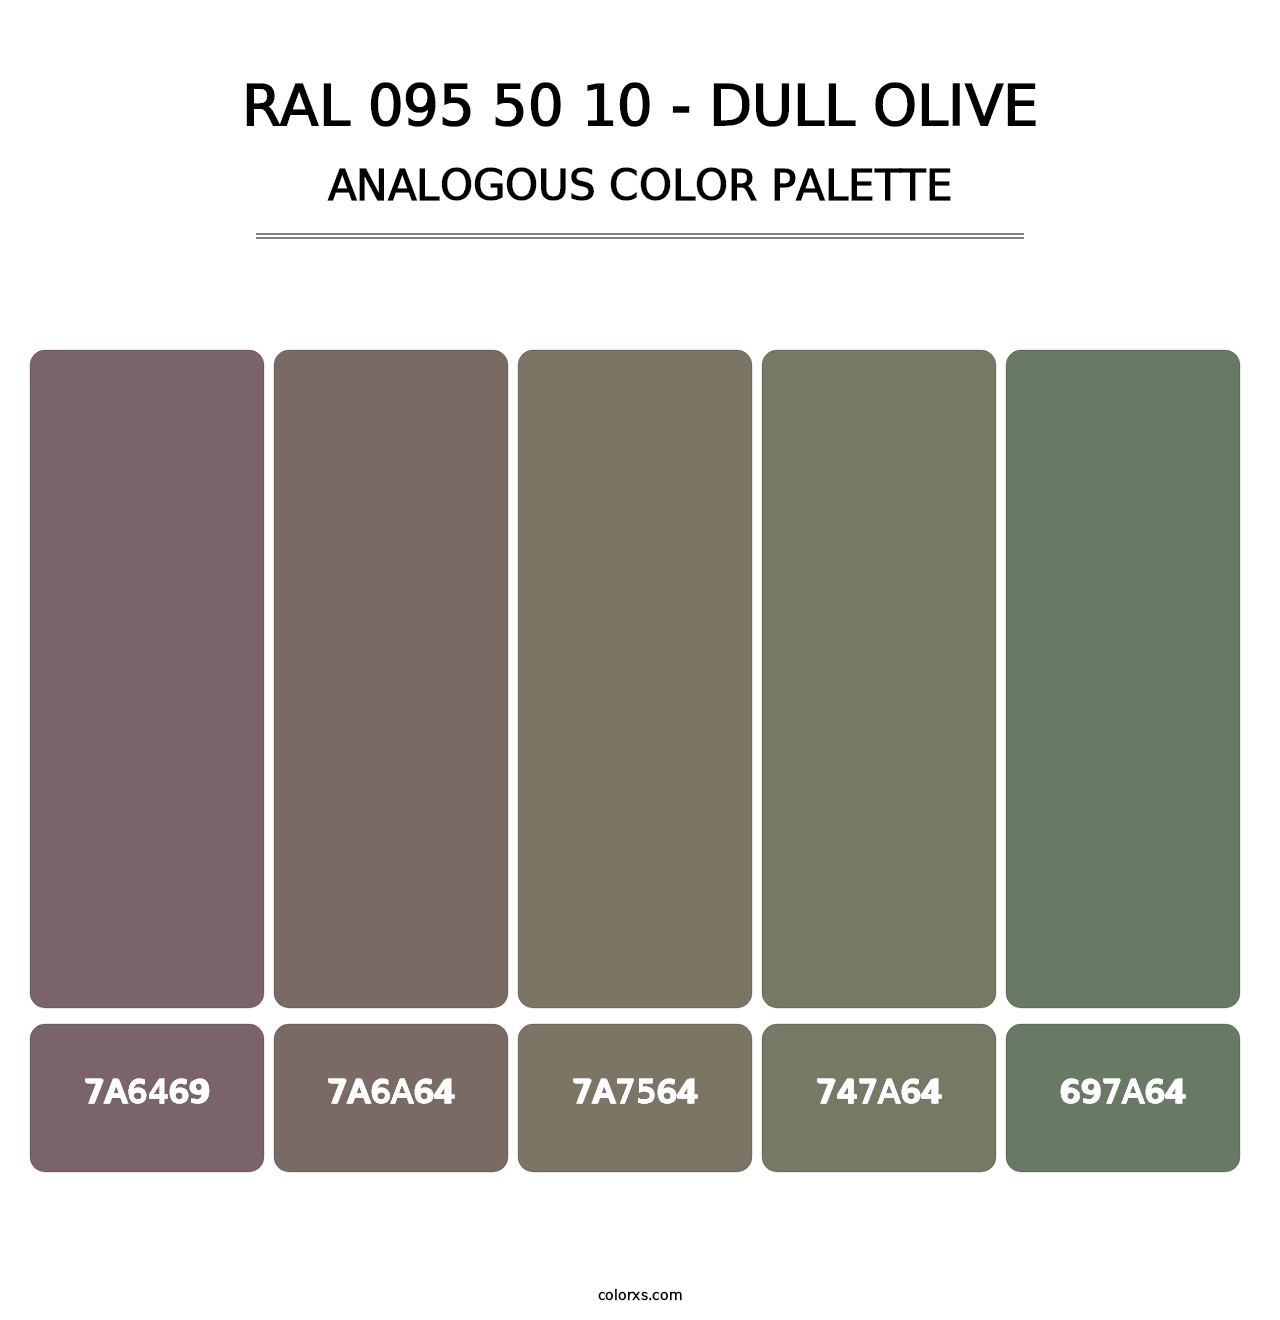 RAL 095 50 10 - Dull Olive - Analogous Color Palette